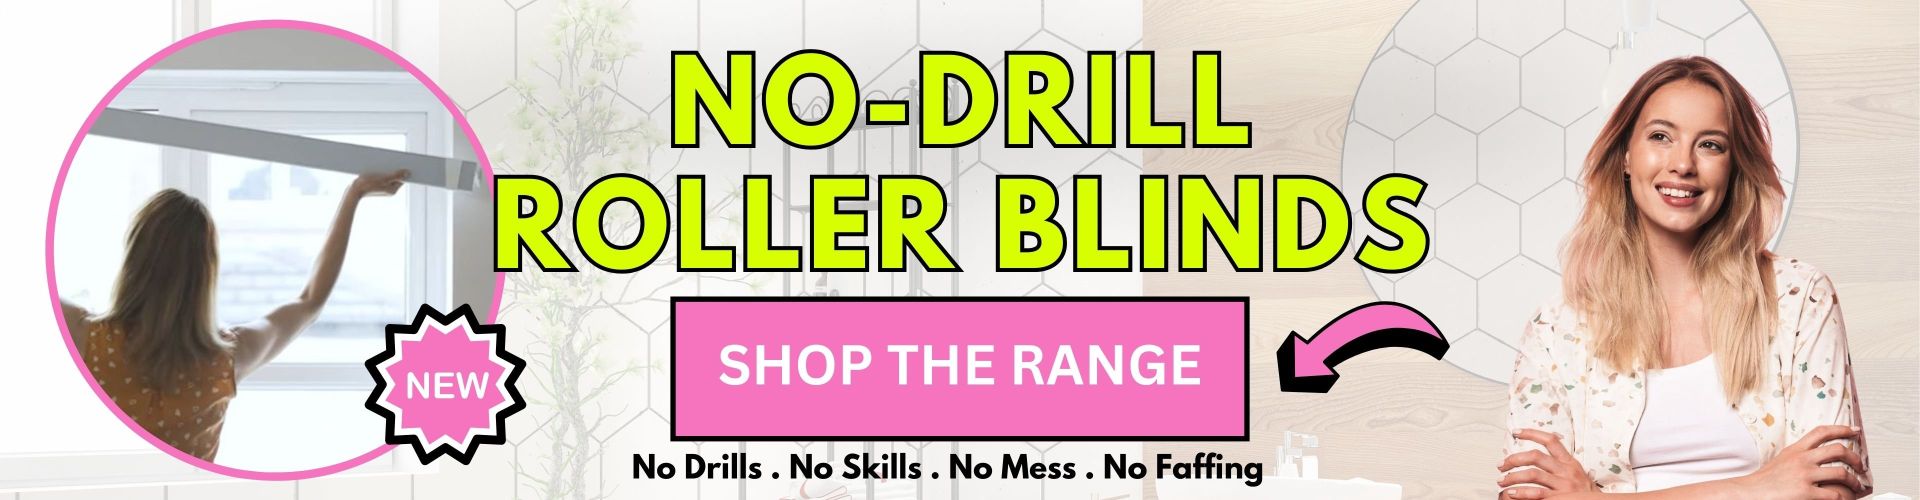 No drill roller blinds 